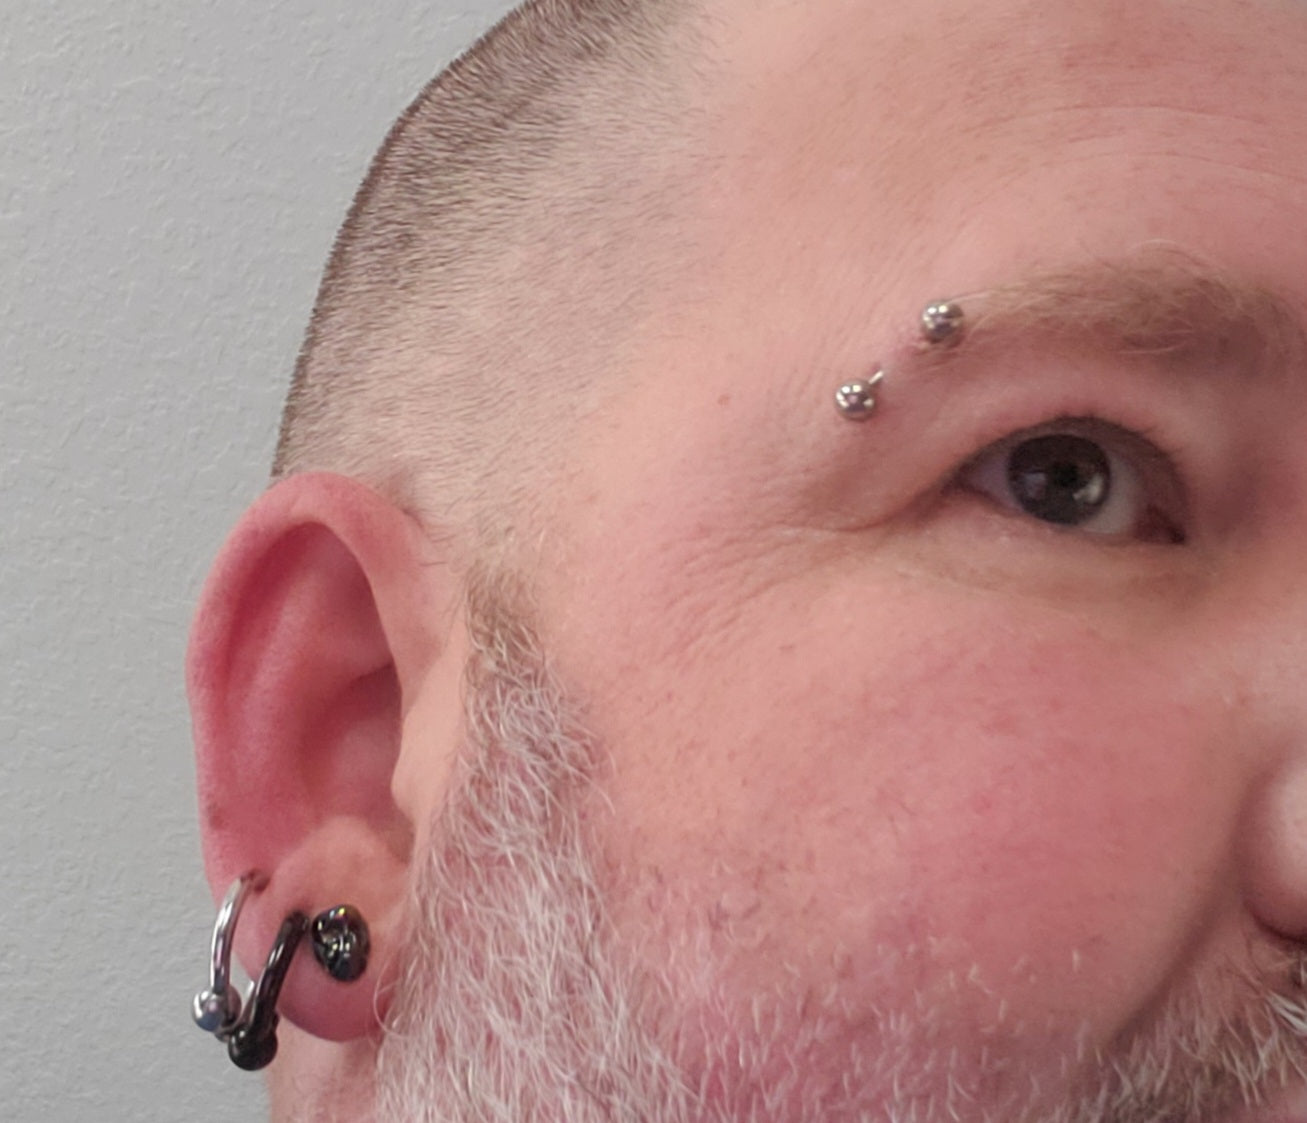 A horizontal eyebrow piercing on the face of a man that has a curved barbell through it along with three earlobe piercings.